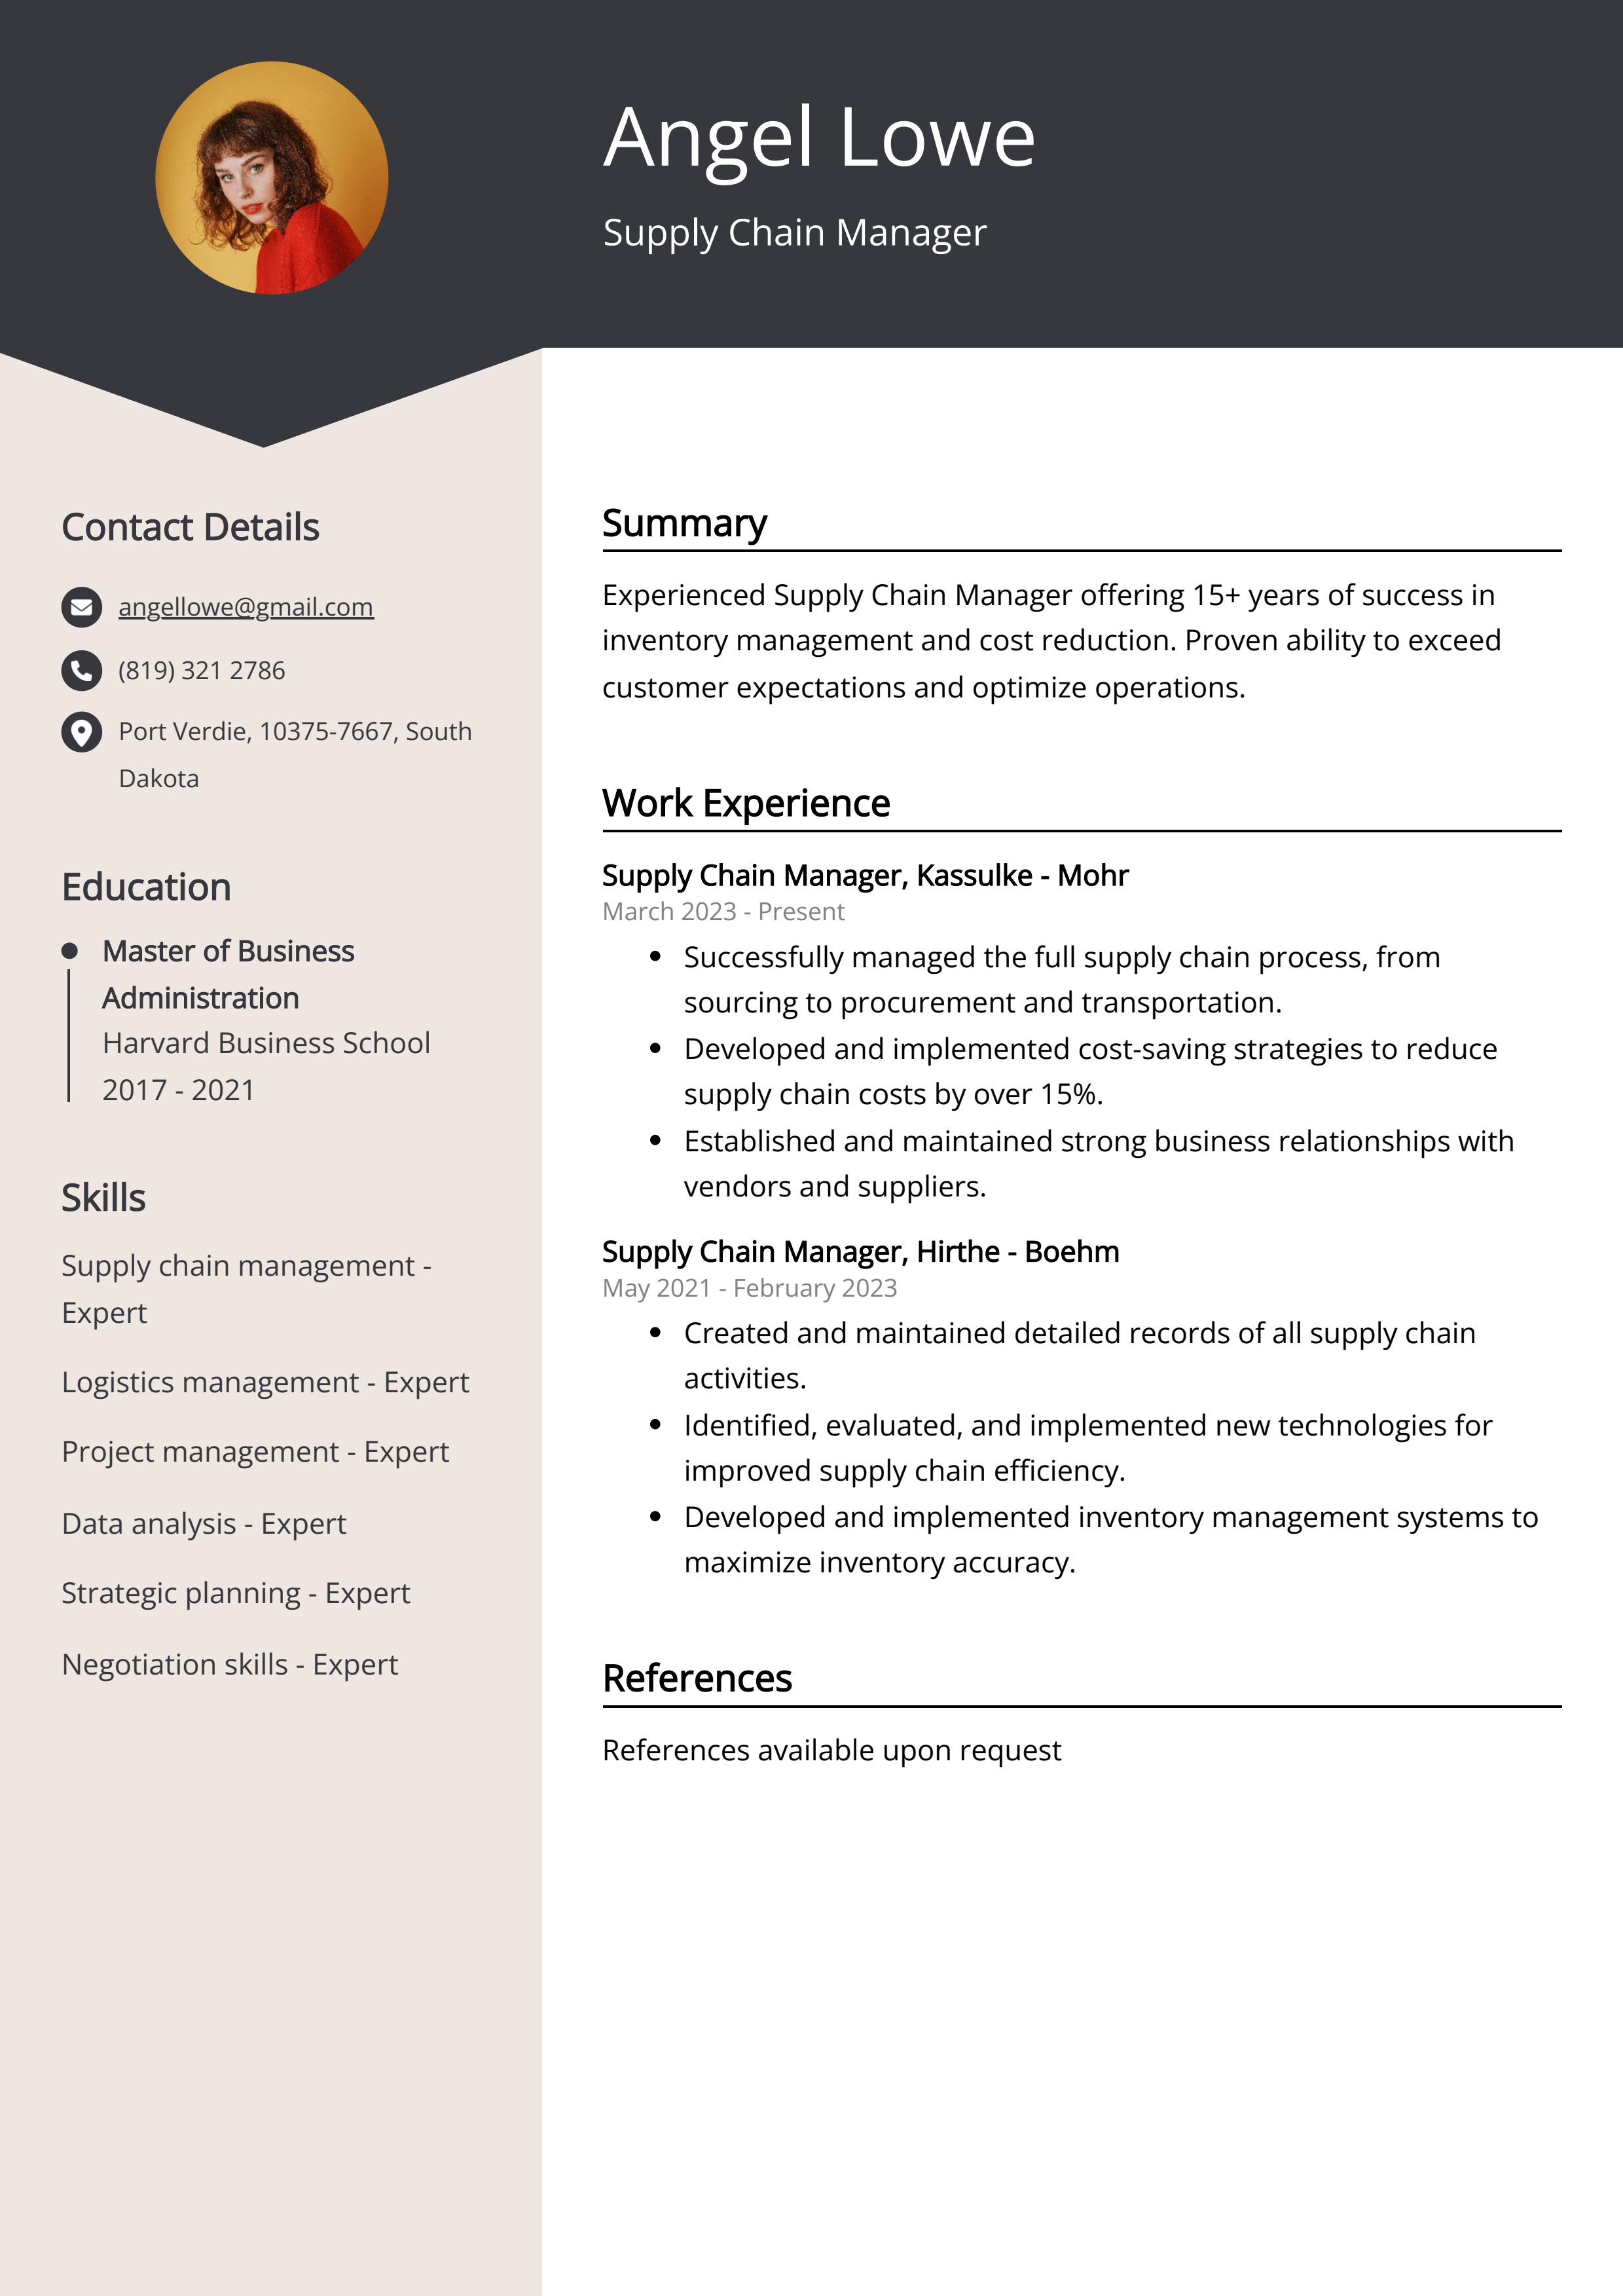 Supply Chain Manager CV Example